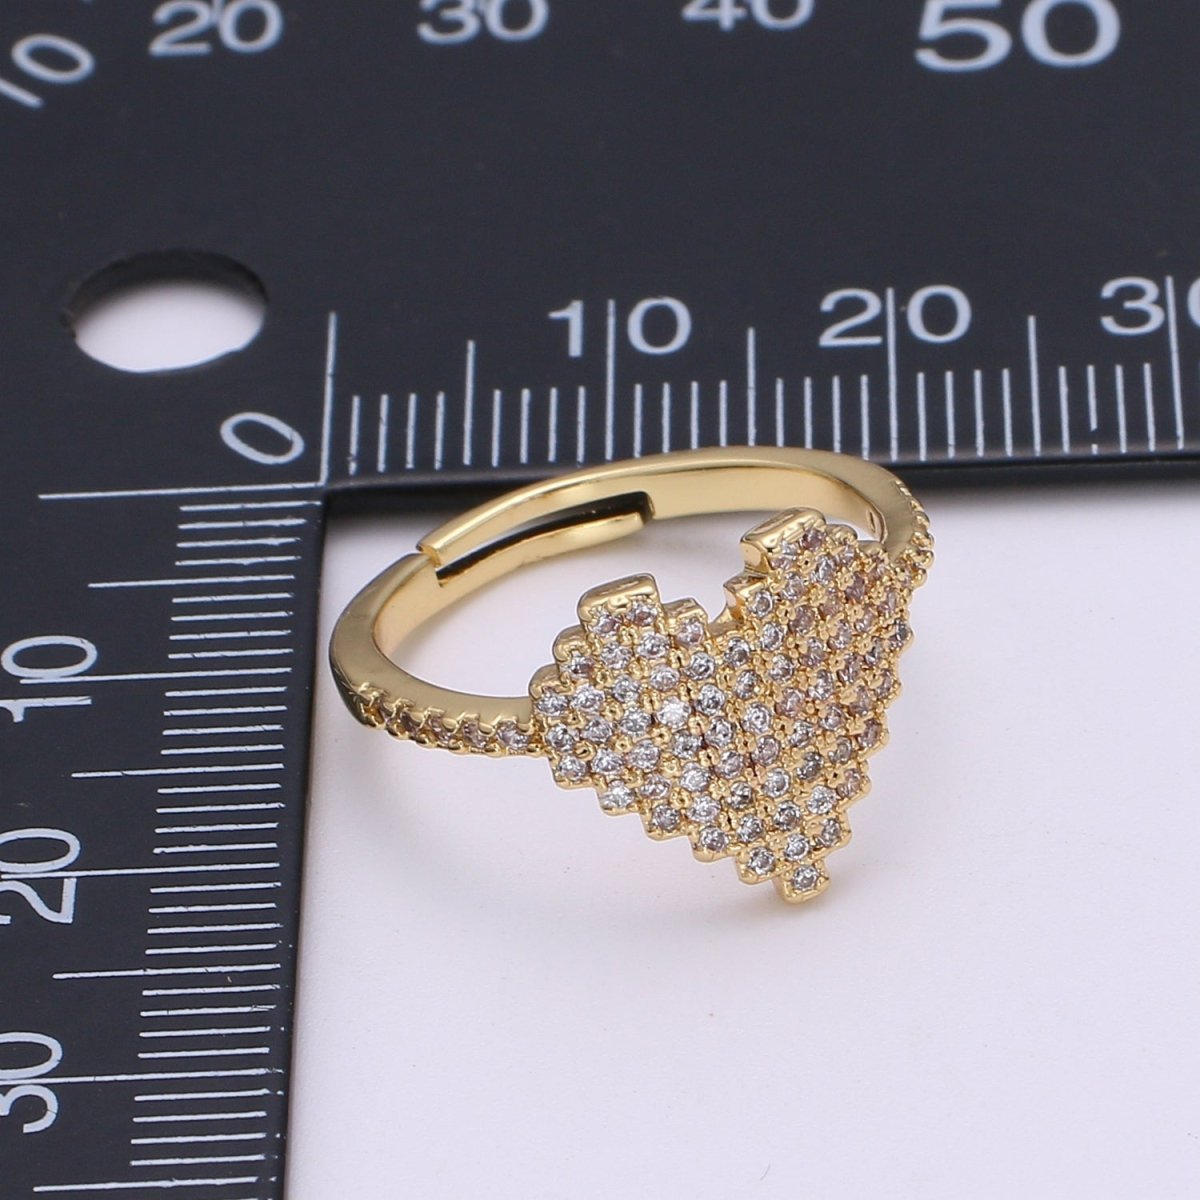 Adjustable 24k Gold Heart Ring, CZ Pave Adjustable Ring for stacking jewelry O-292 - DLUXCA